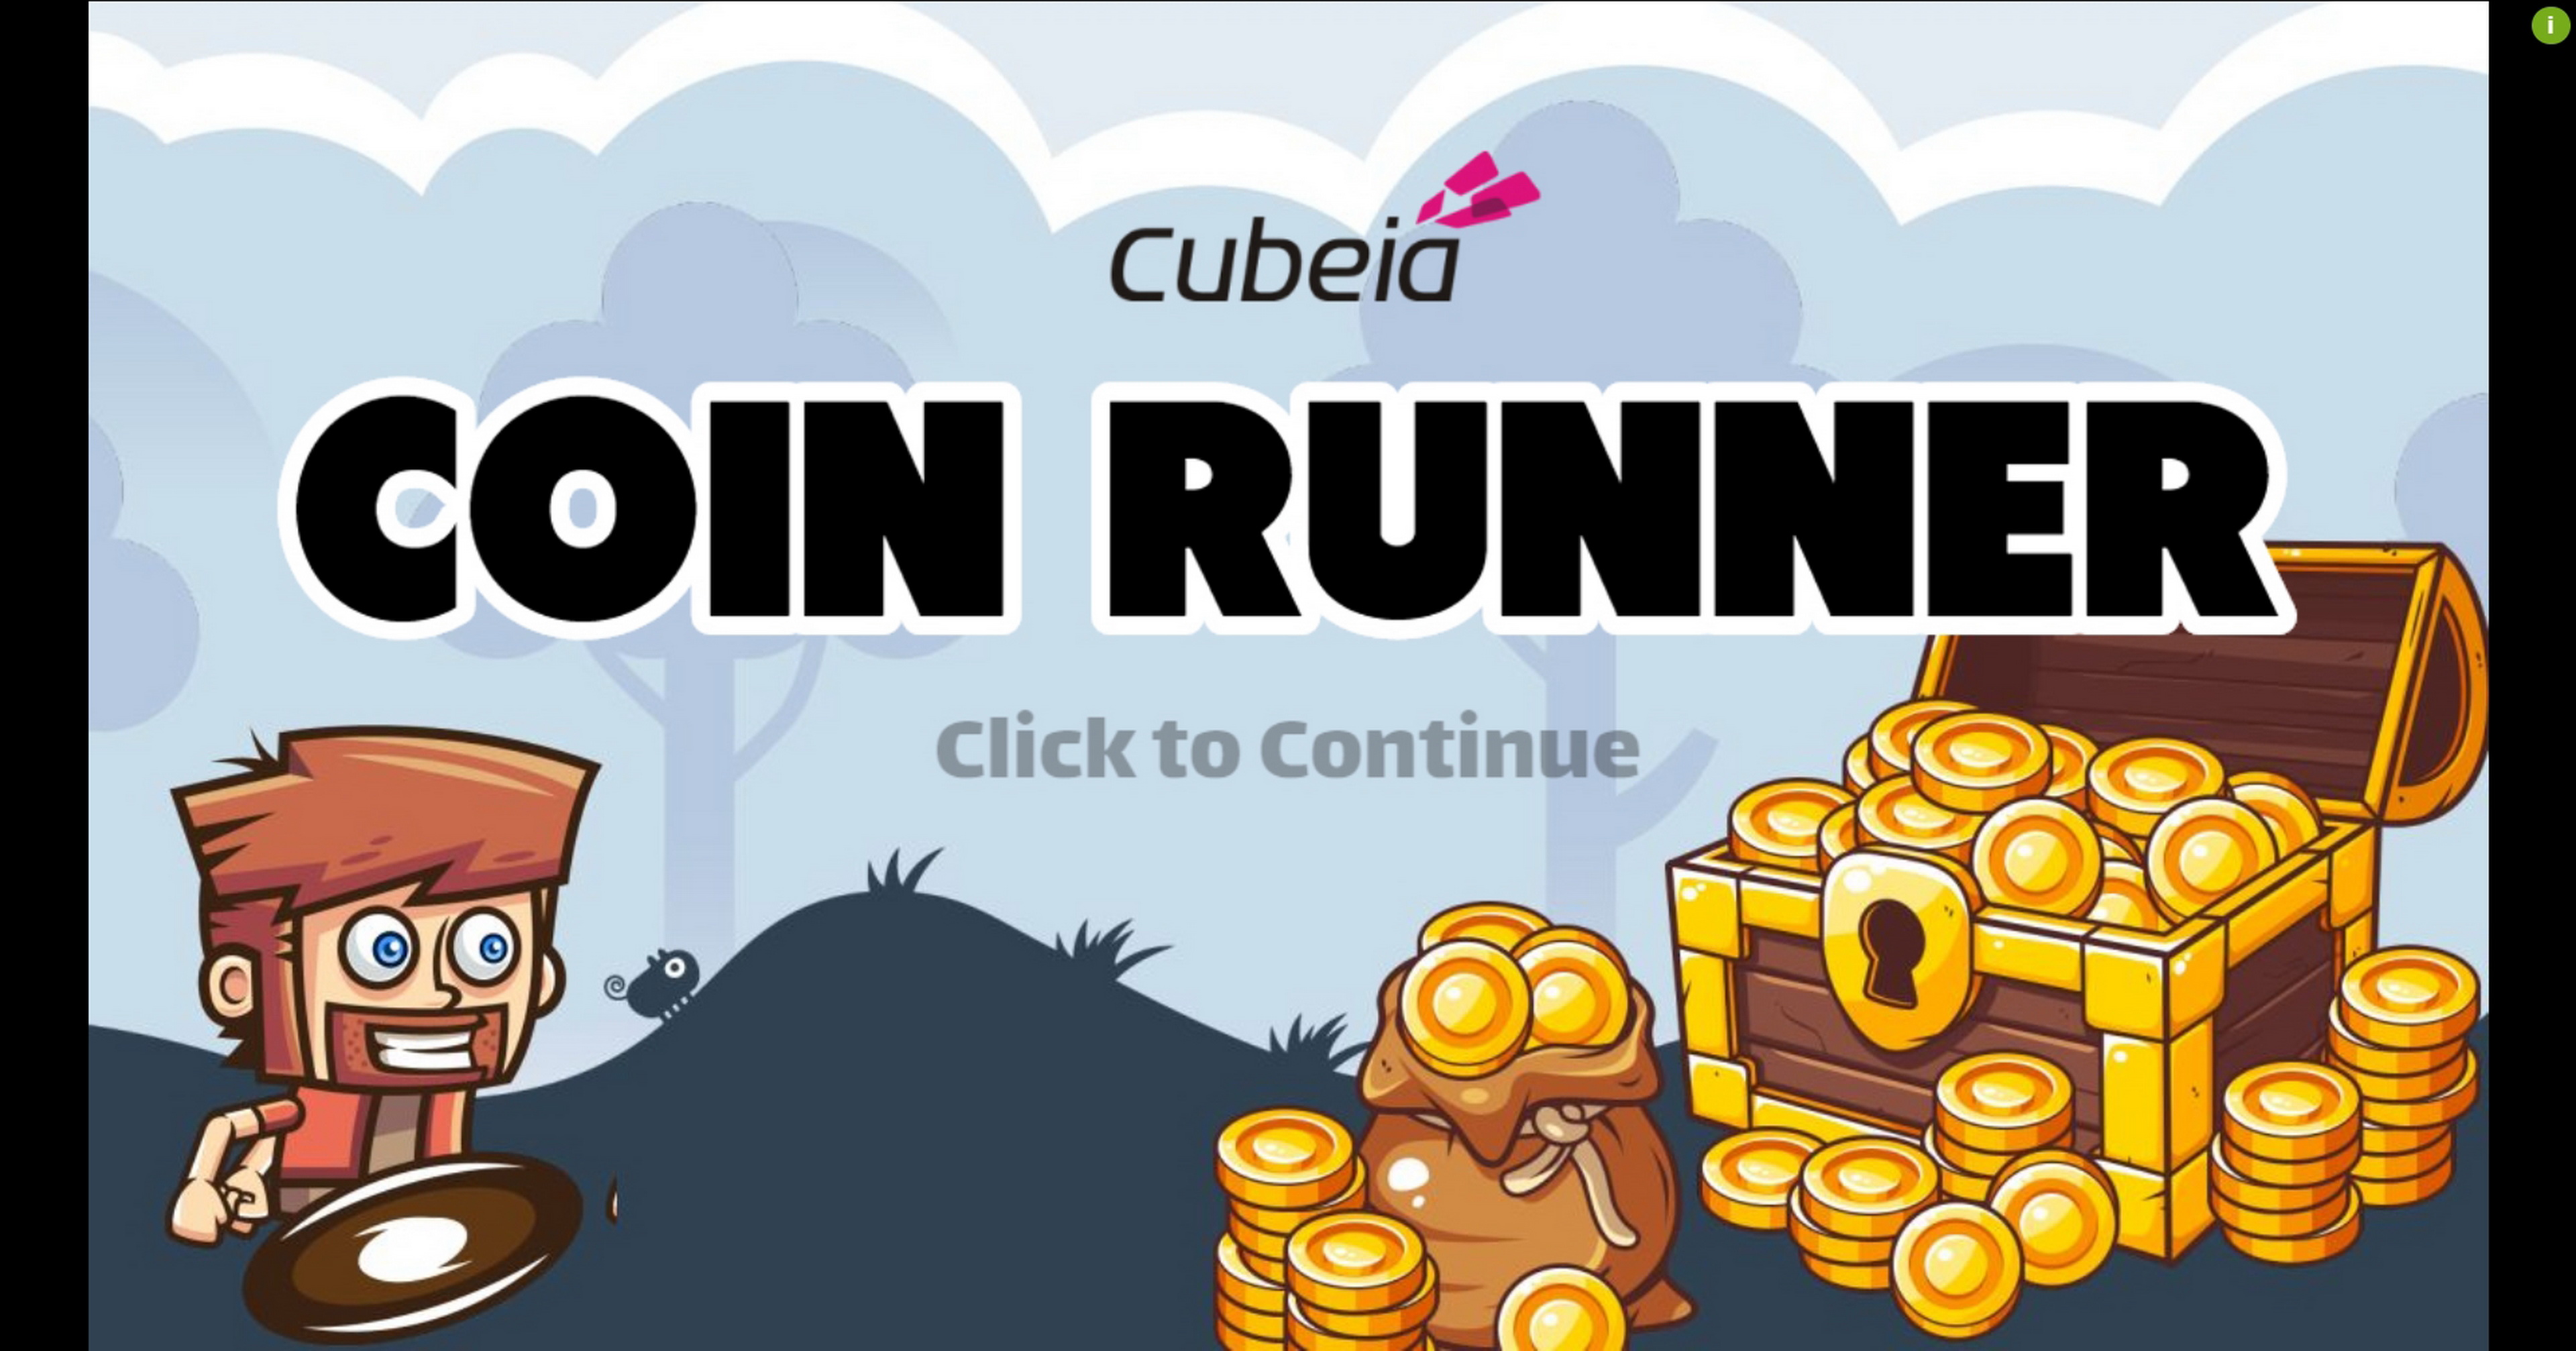 Play Coin Runner Free Casino Slot Game by Cubeia